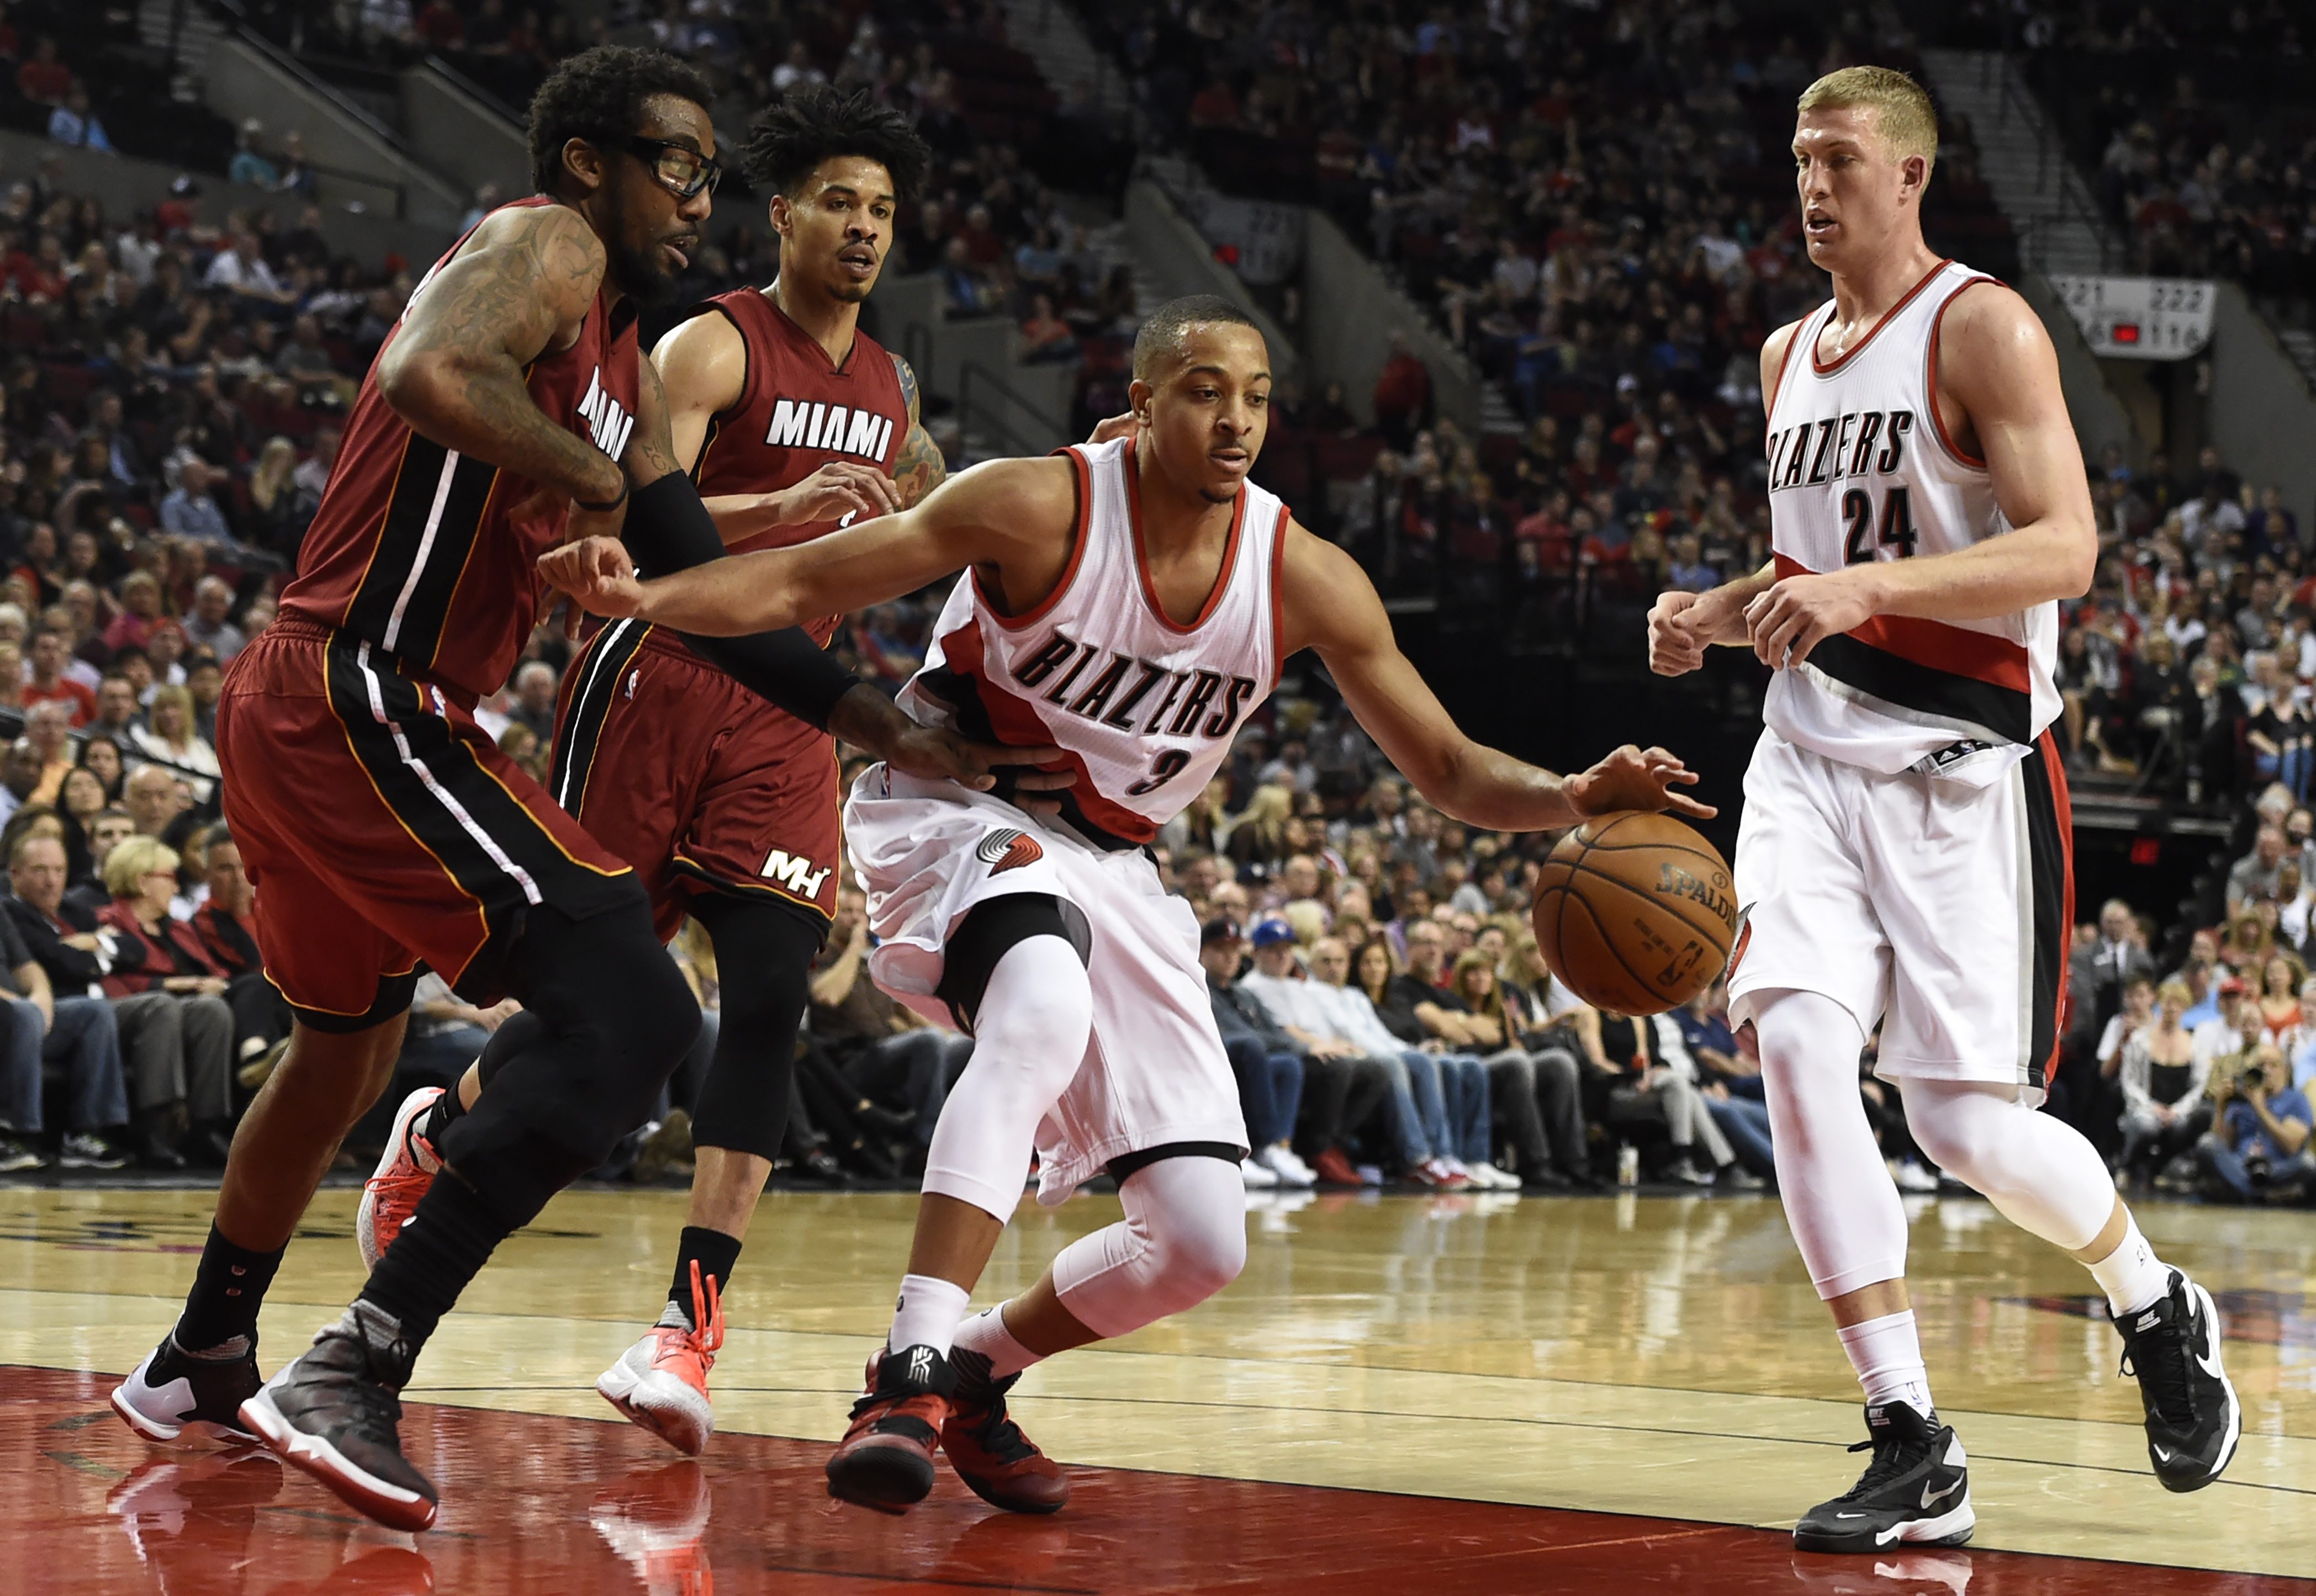 Portland Trail Blazers guard C.J. McCollum (3) tries to dribble the ball past Miami Heat forward Amare Stoudemire and guard Gerald Green (14) as Trail Blazers center Mason Plumlee (24) closes in during the second half of an NBA basketball game in Portland, Ore., Saturday April 2, 2016. The Blazers won 110-93.